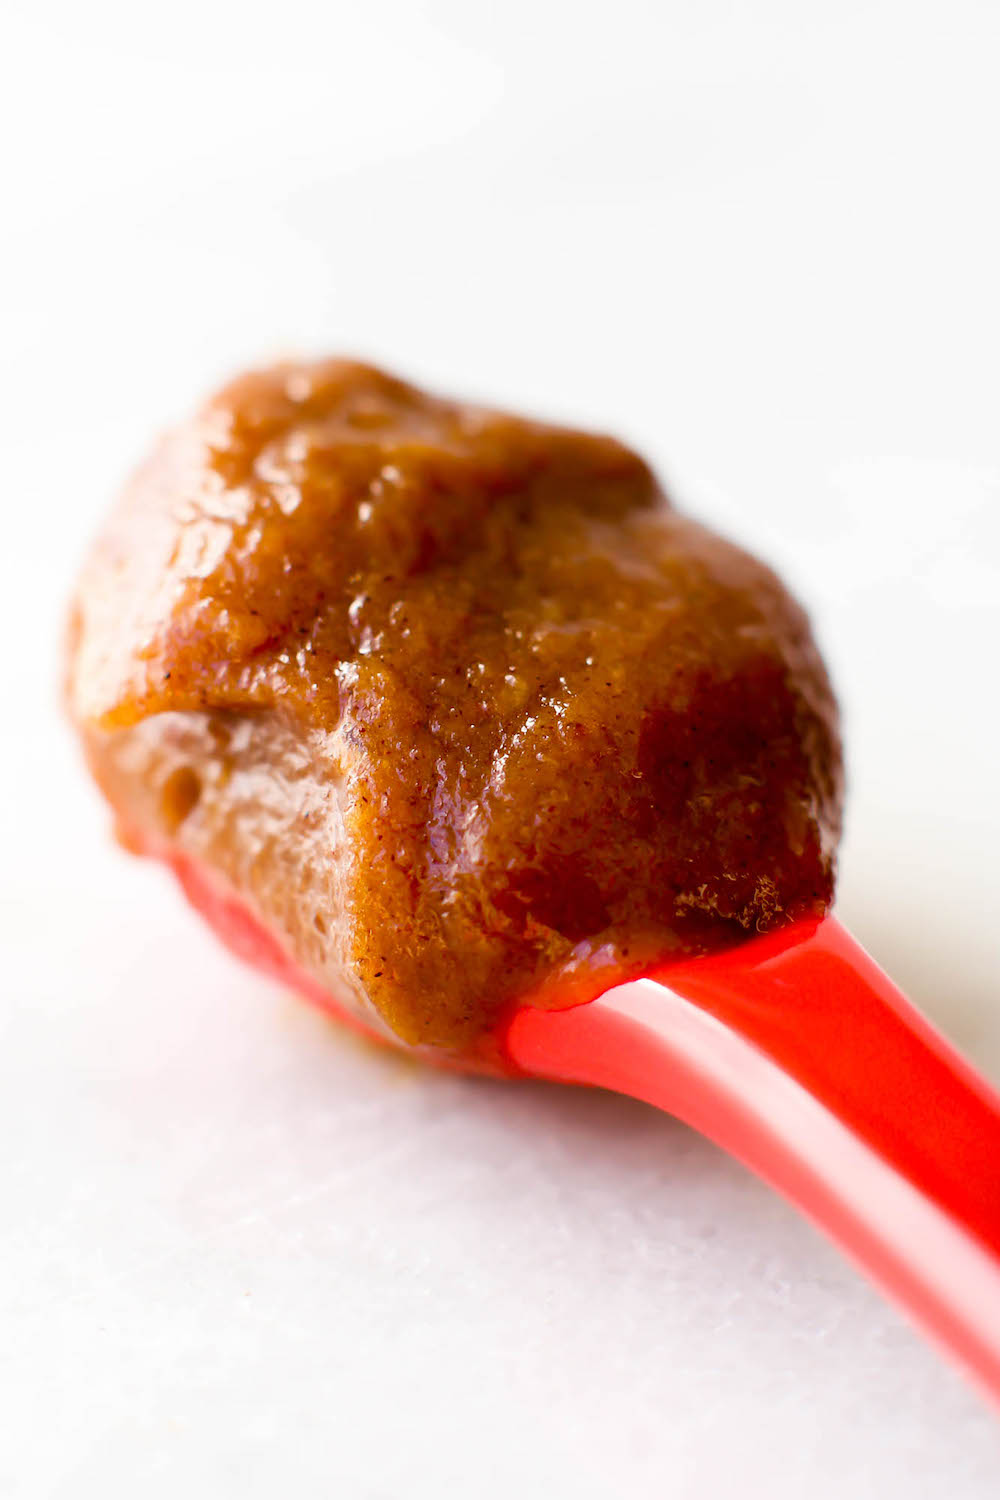 5-Minute Caramel Apple Butter | Naturally-Sweetened & No-Cook